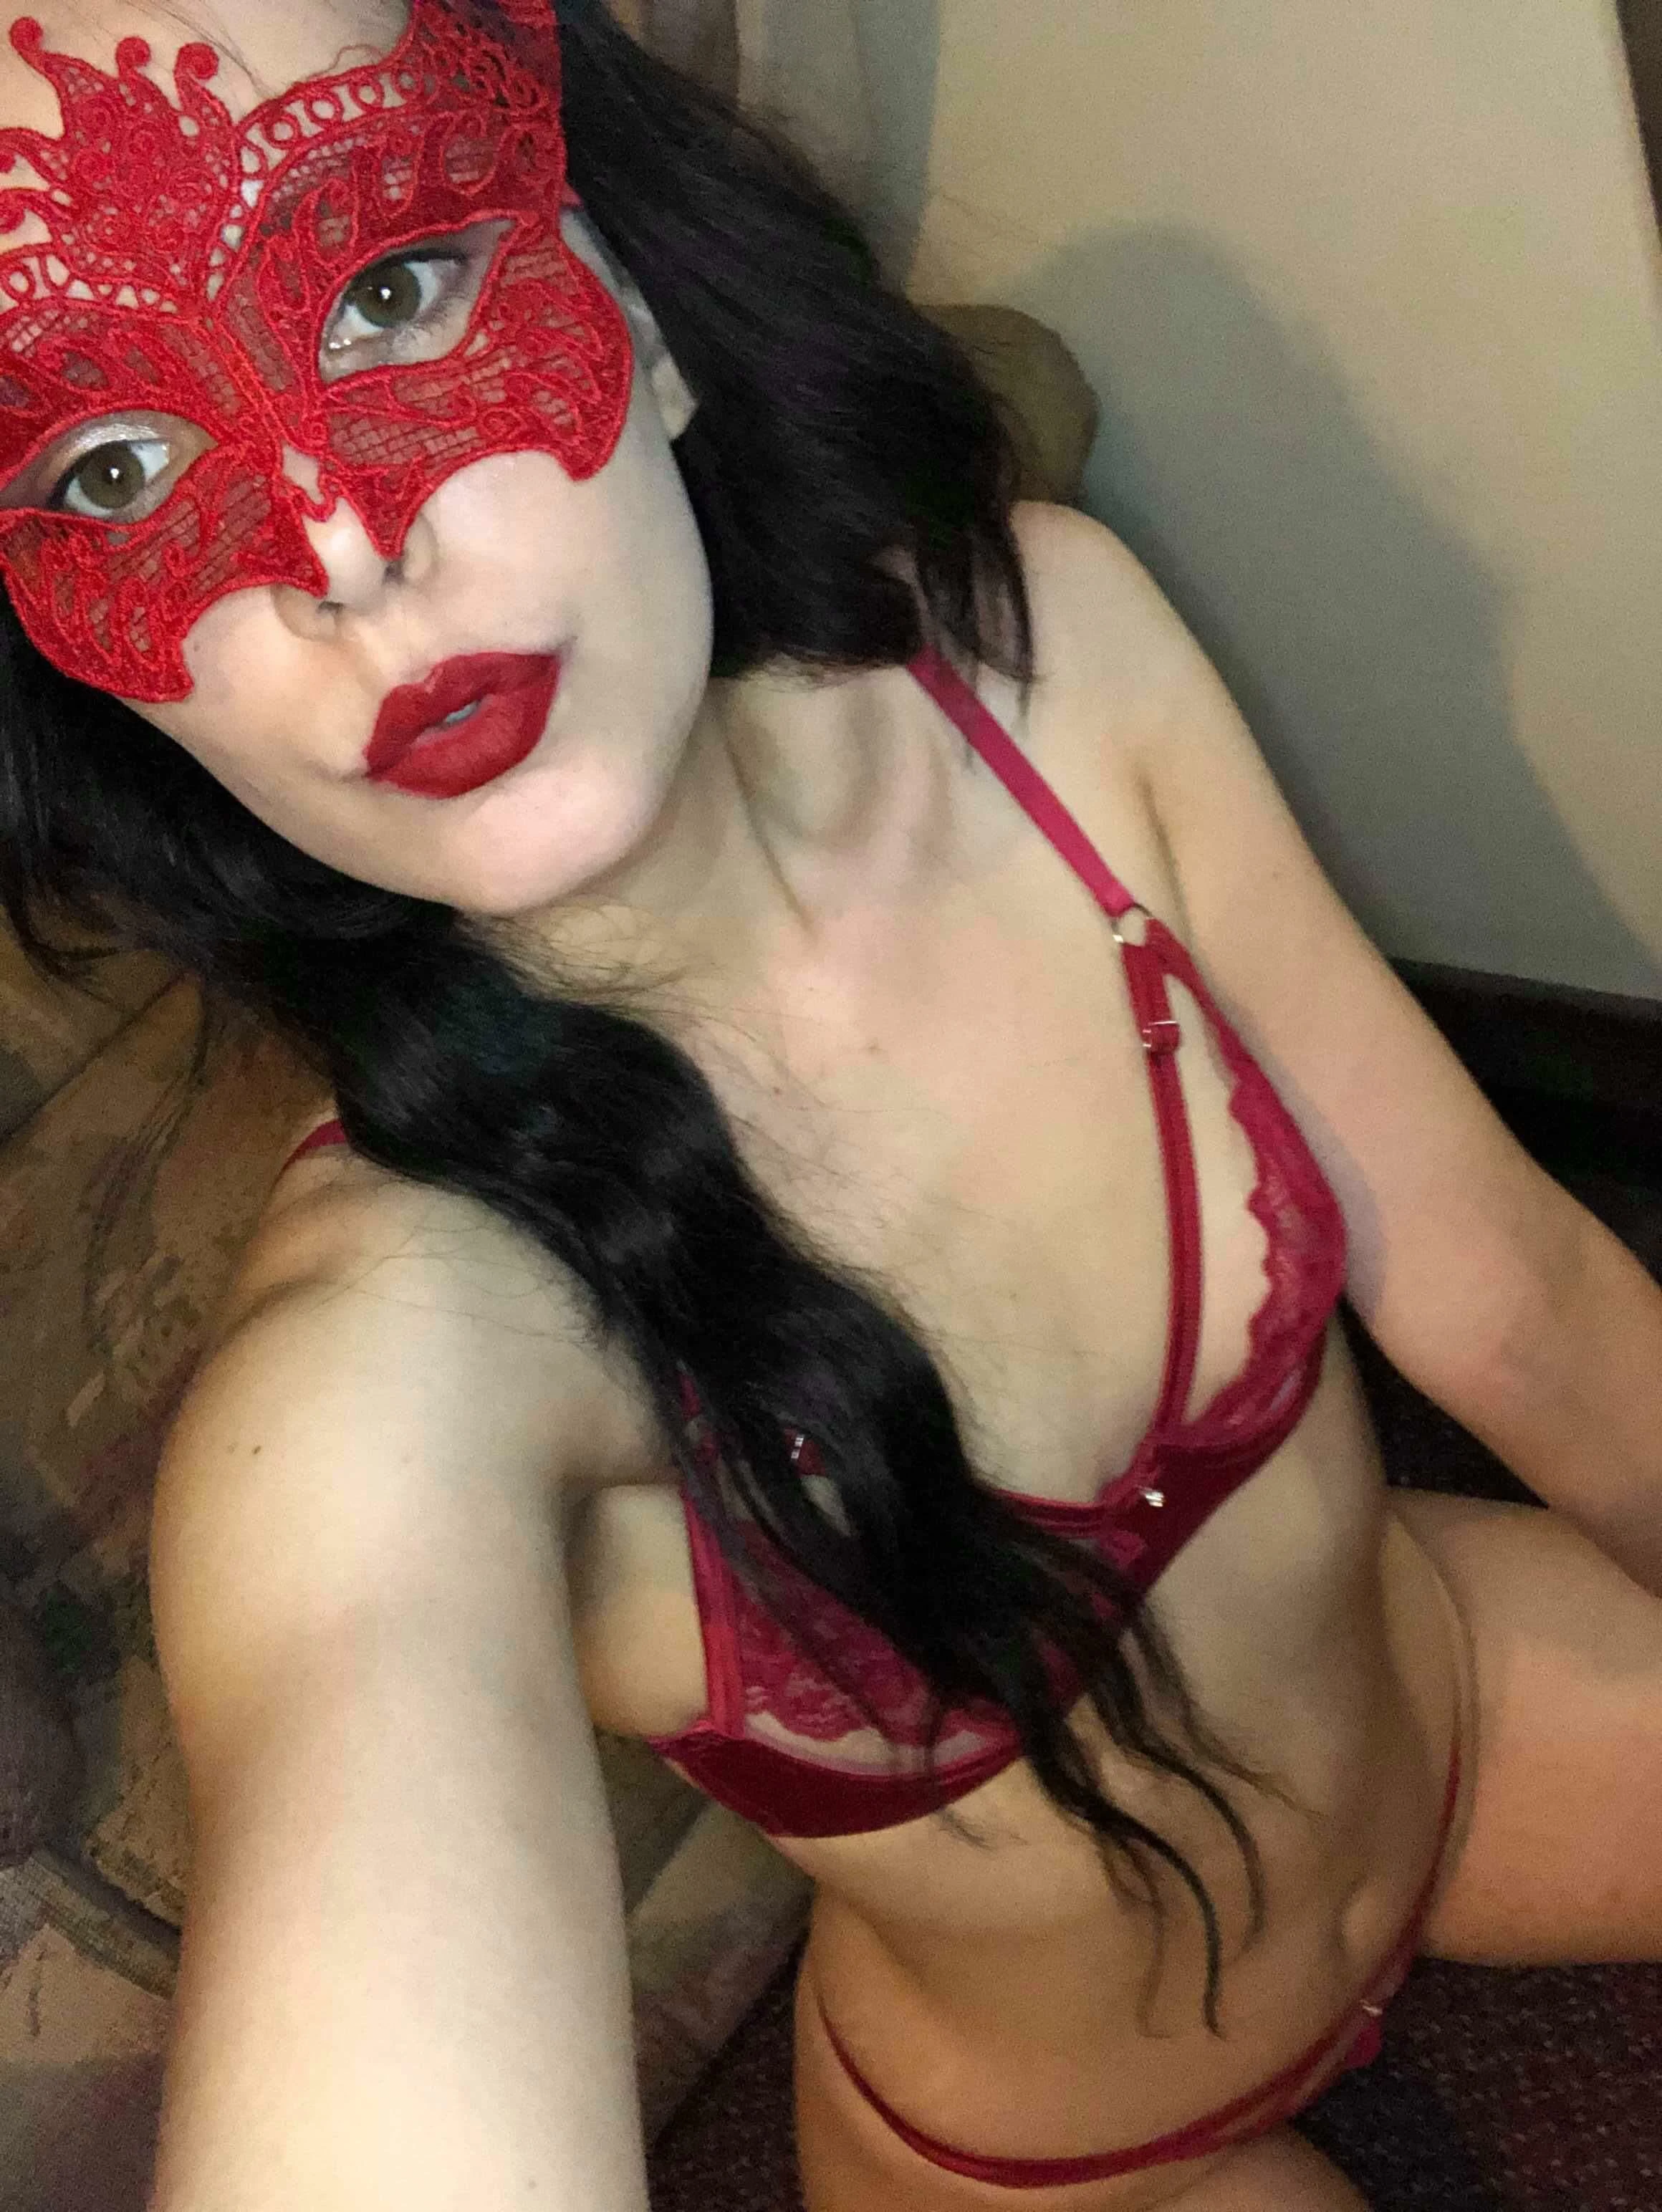 Masked and ready ,Bet this lipstick would look good on your cock